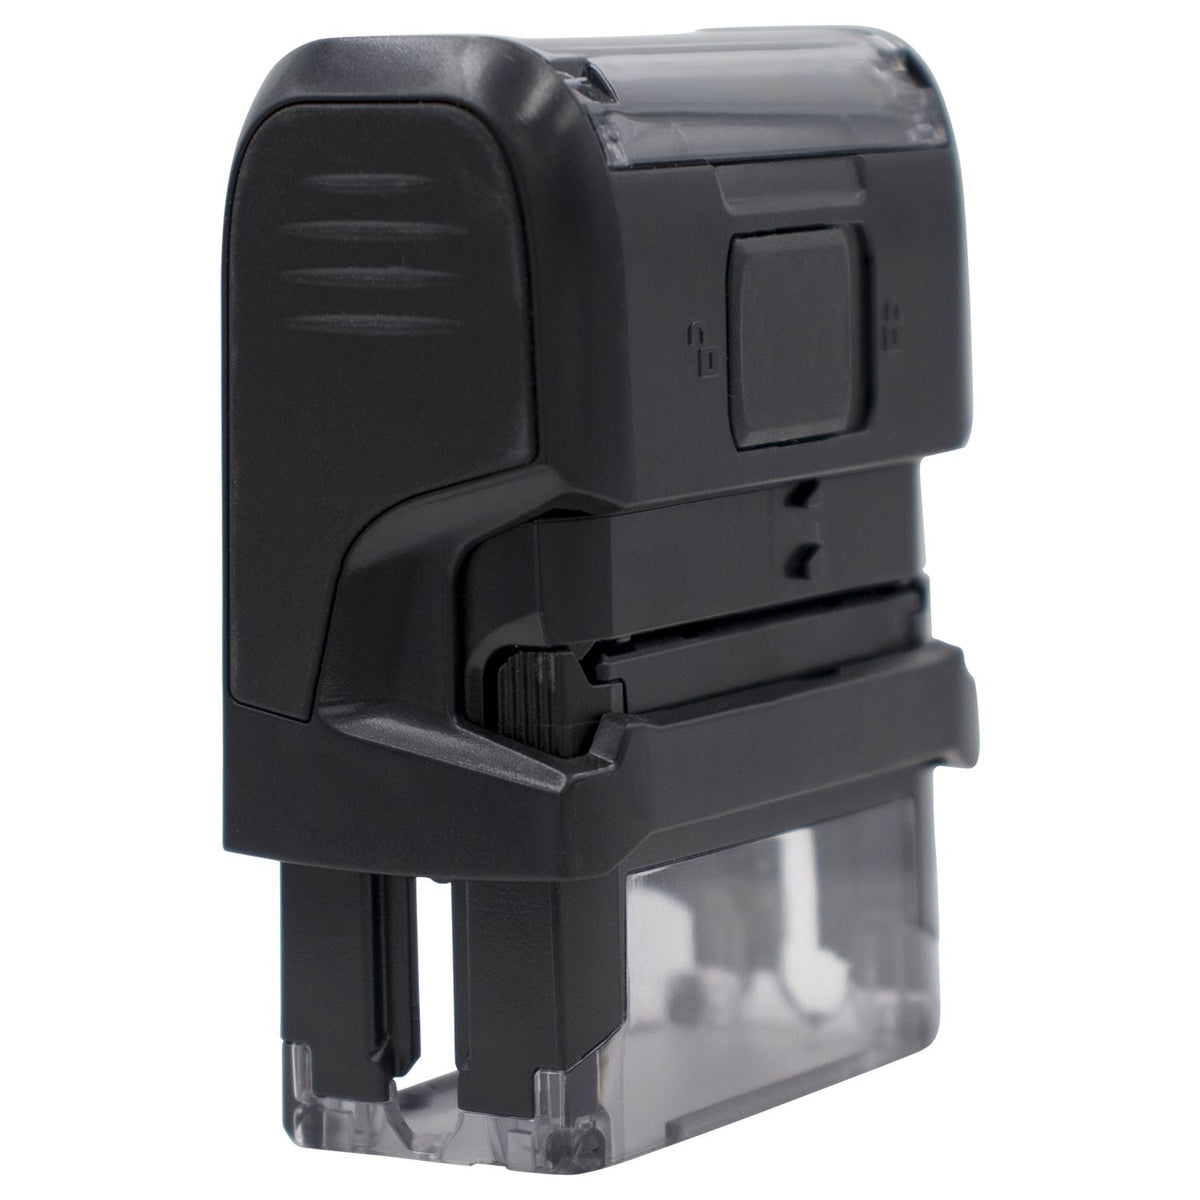 Self Inking Motion Stamp Back View